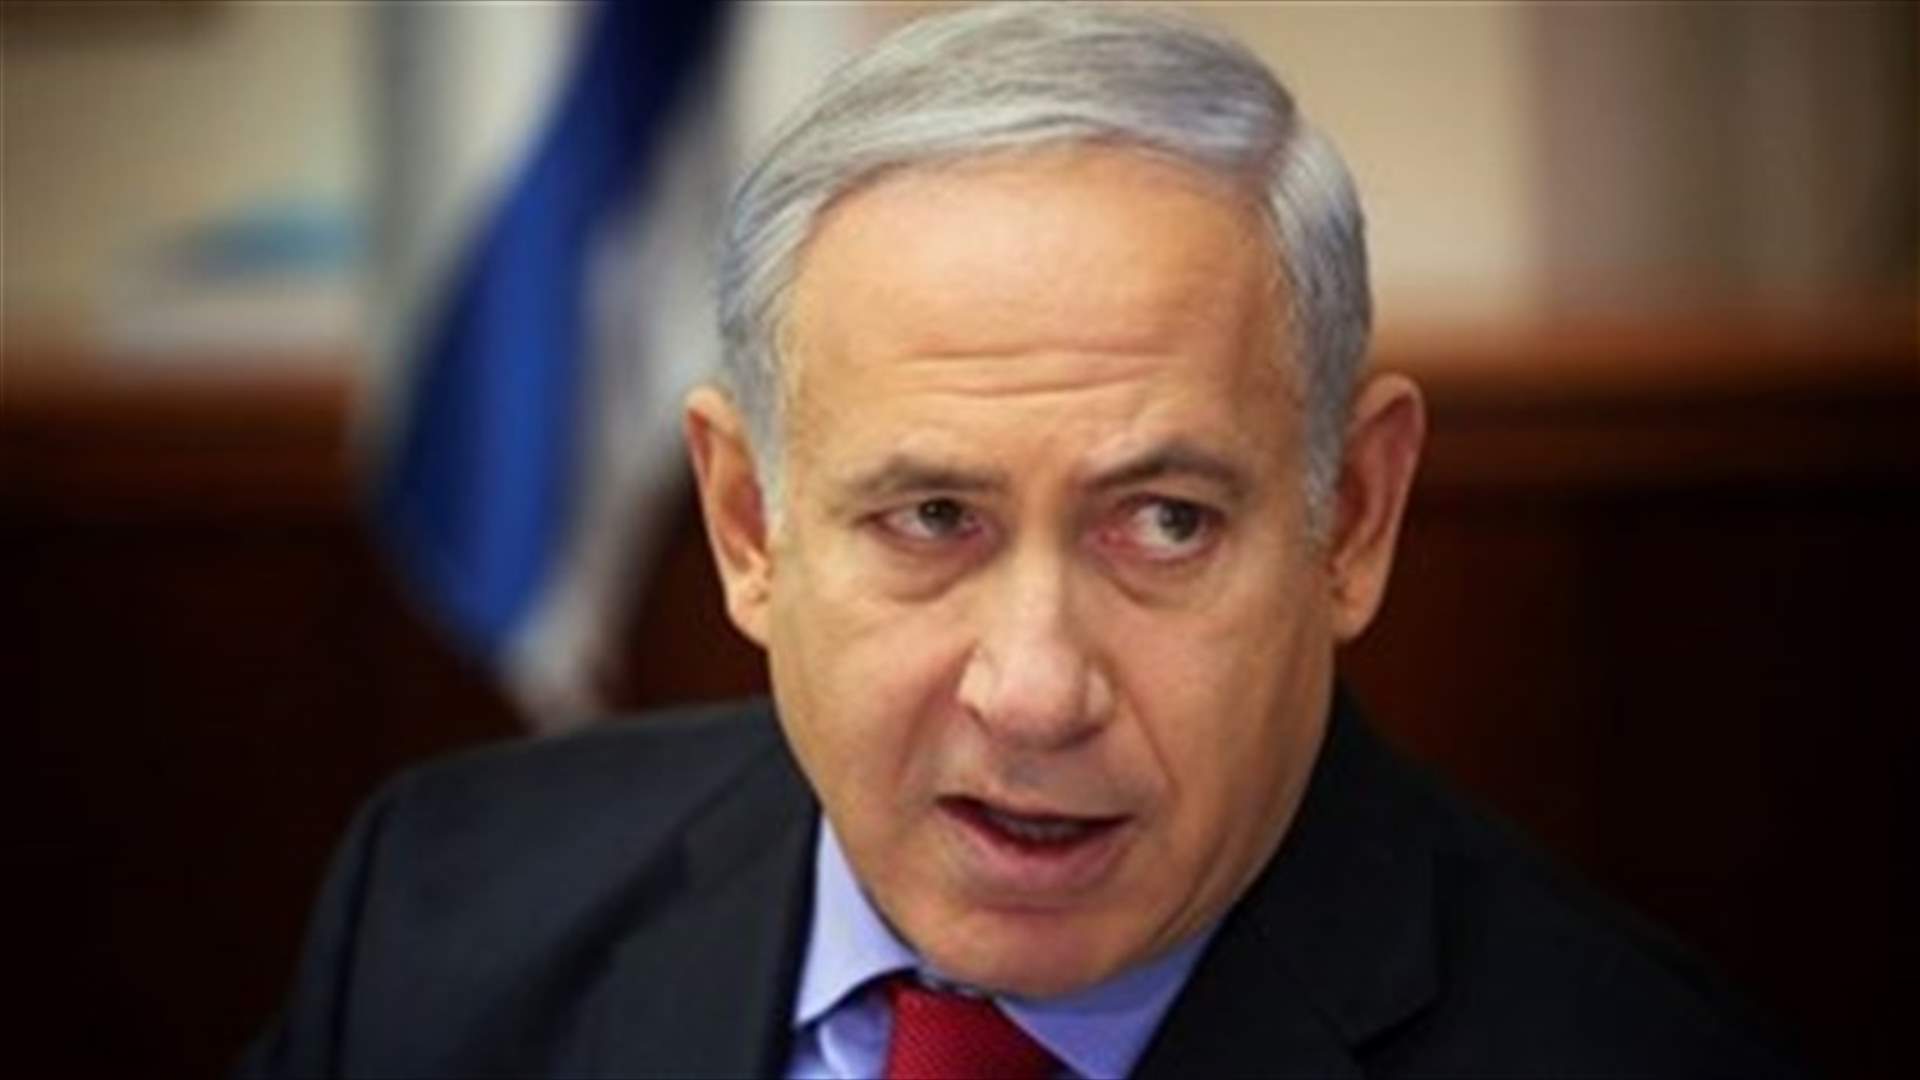 Netanyahu says Paris peace conference &quot;rigged&quot; against Israel